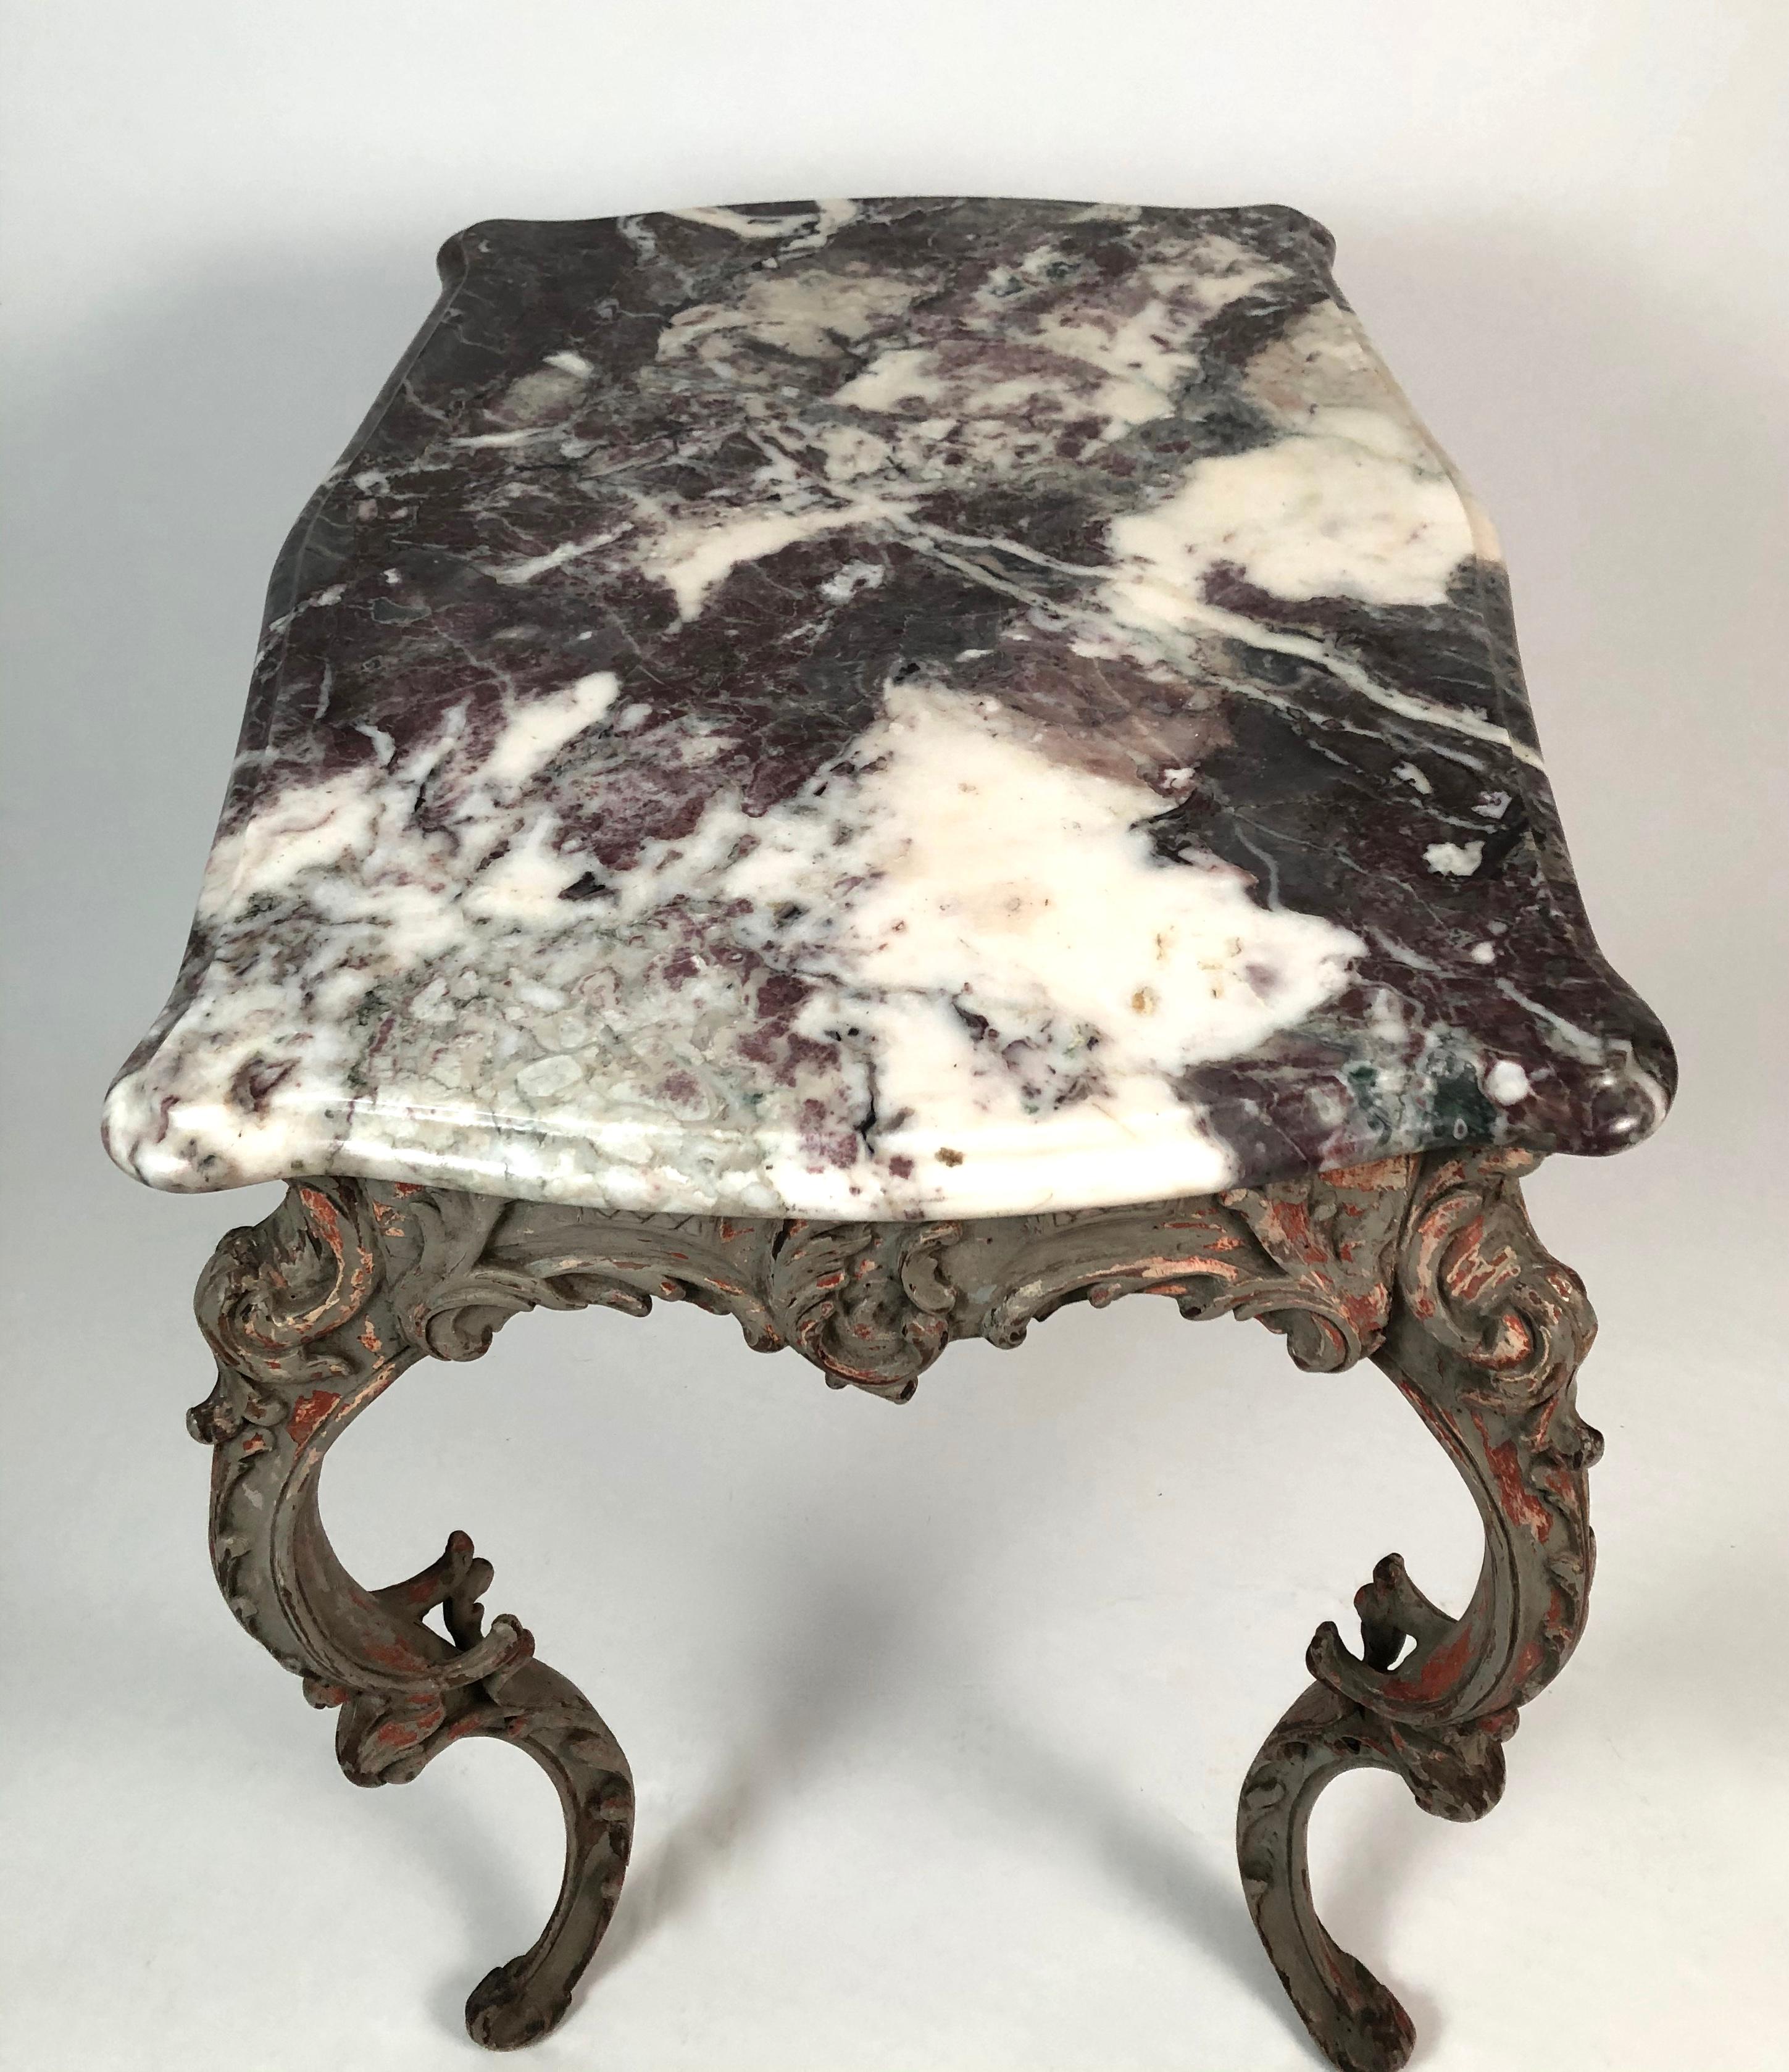 An 18th century Italian Rococo table with a serpentine breccia violetta--a variegated lilac colored marble-- top over a floral carved apron and boldly curved C-scrolled legs, in grey paint which shows coral pigment underneath from when it may have